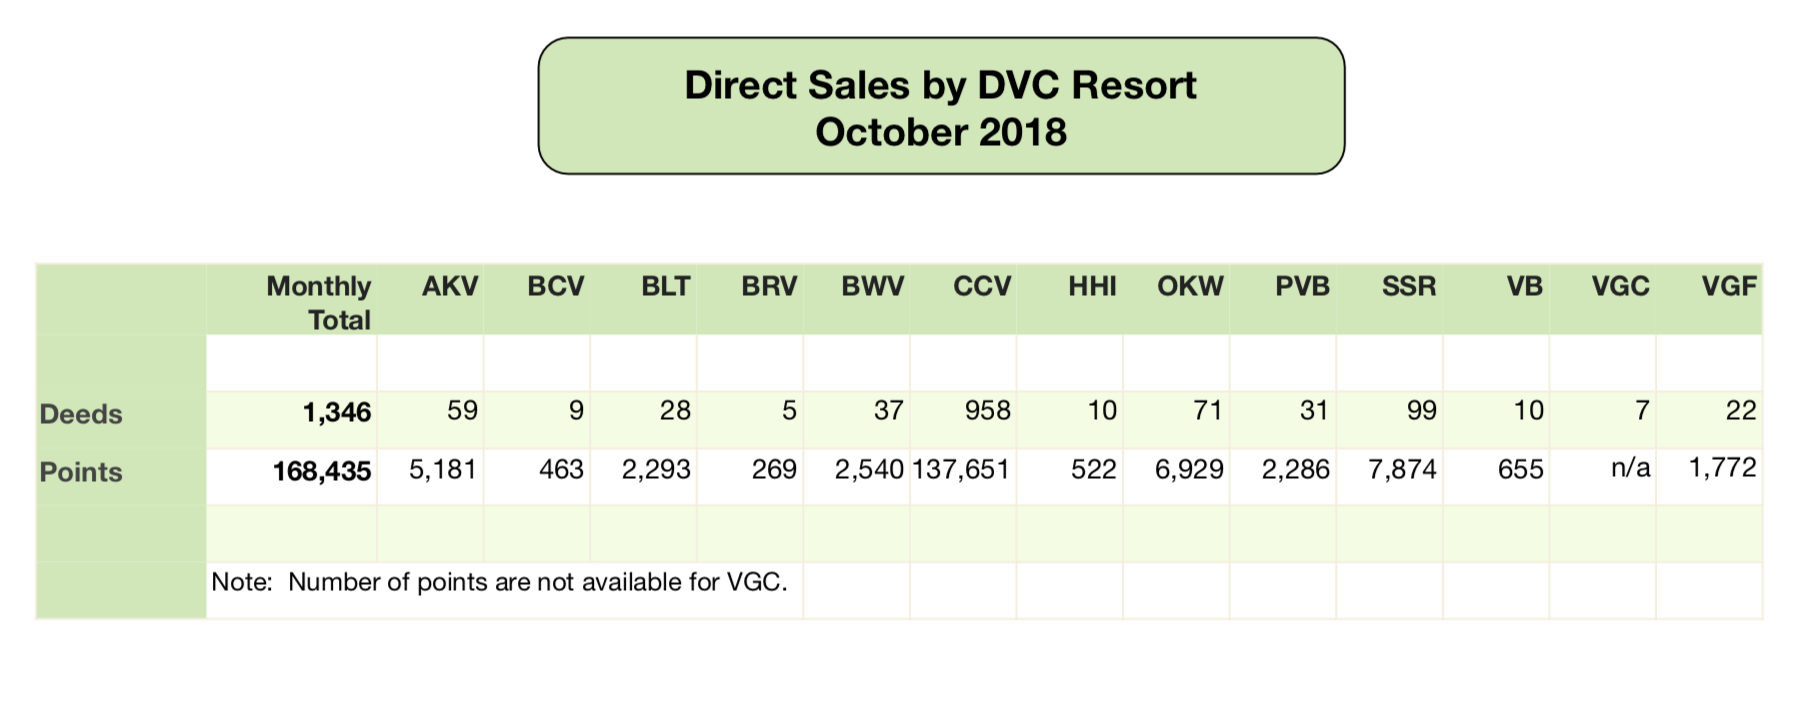 DVC Direct Sales - October 2018